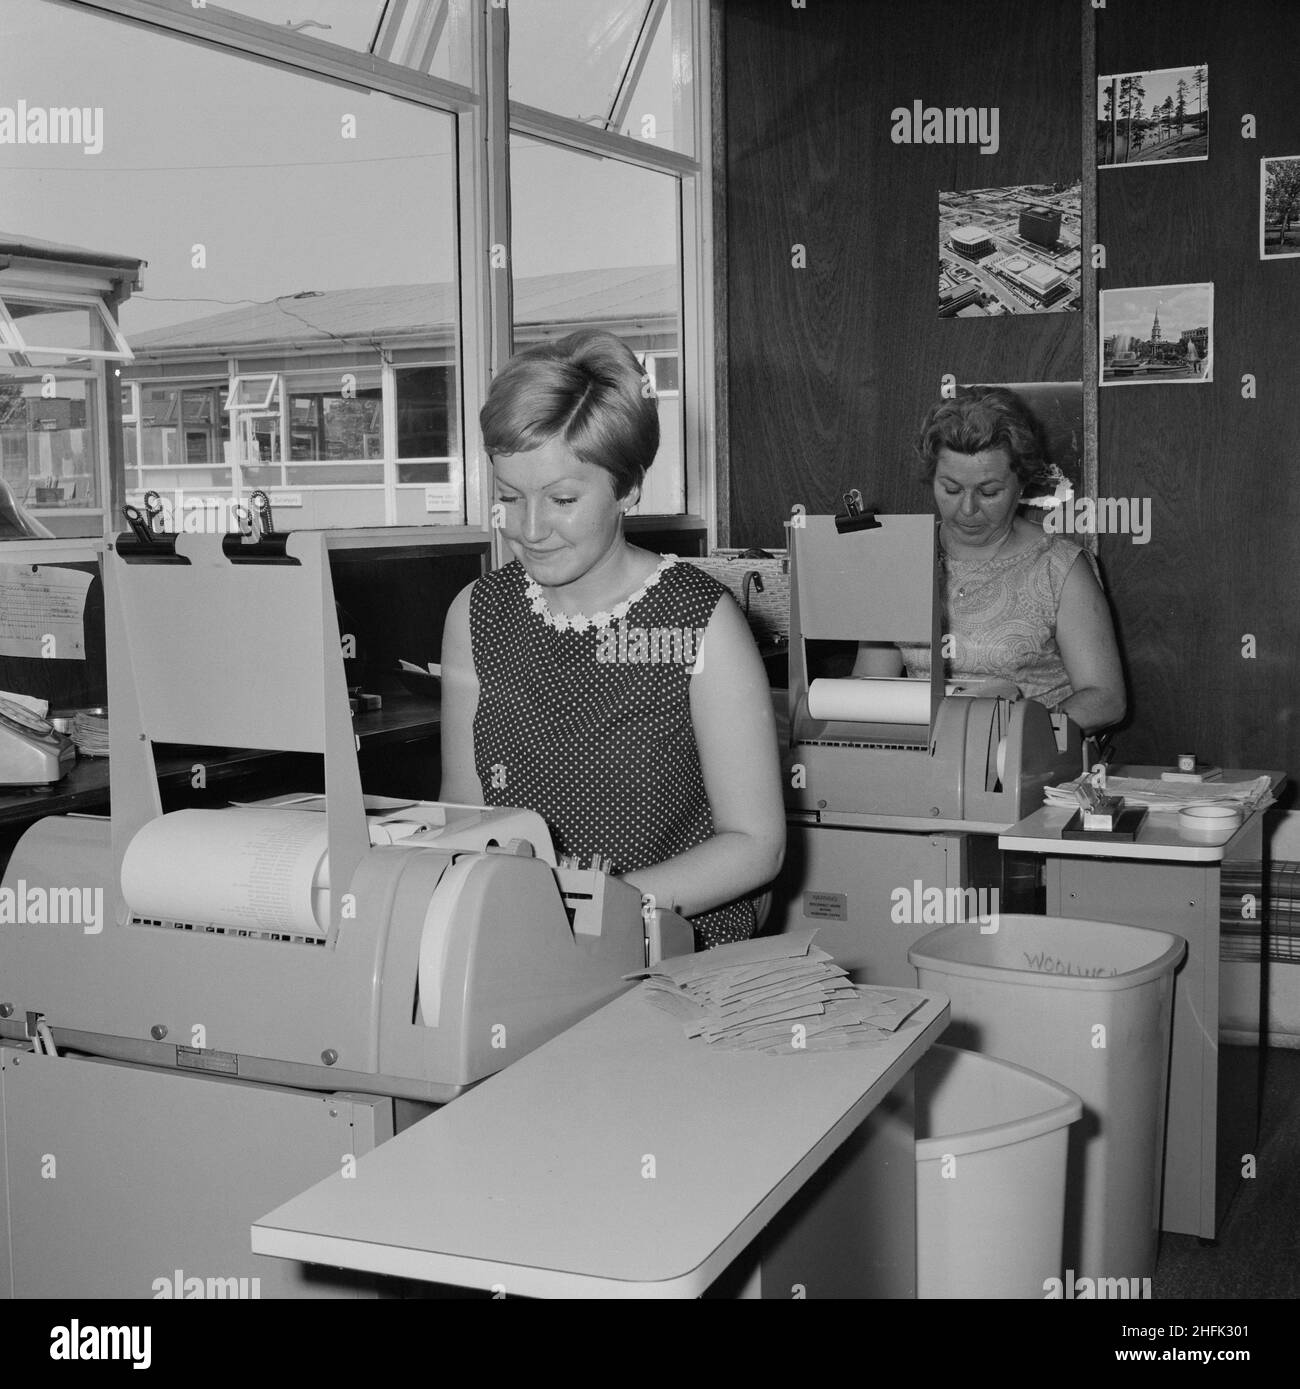 Aylesbury Estate, Walworth, Southwark, London, 28/06/1968. Two women working in the computer room of Laing's construction site at the Aylesbury Estate. In 1963, John Laing and Son Ltd bought the rights to the Danish industrialised building system for flats known as &#x2018;Jespersen&#x2019; (also called 'Jesperson'). The company built factories in Scotland, Hampshire and Lancashire producing Jespersen prefabricated parts and precast concrete panels, allowing the building of housing to be rationalised, saving time and money. Laing's Southern Region started building the Aylesbury Estate in 1967. Stock Photo